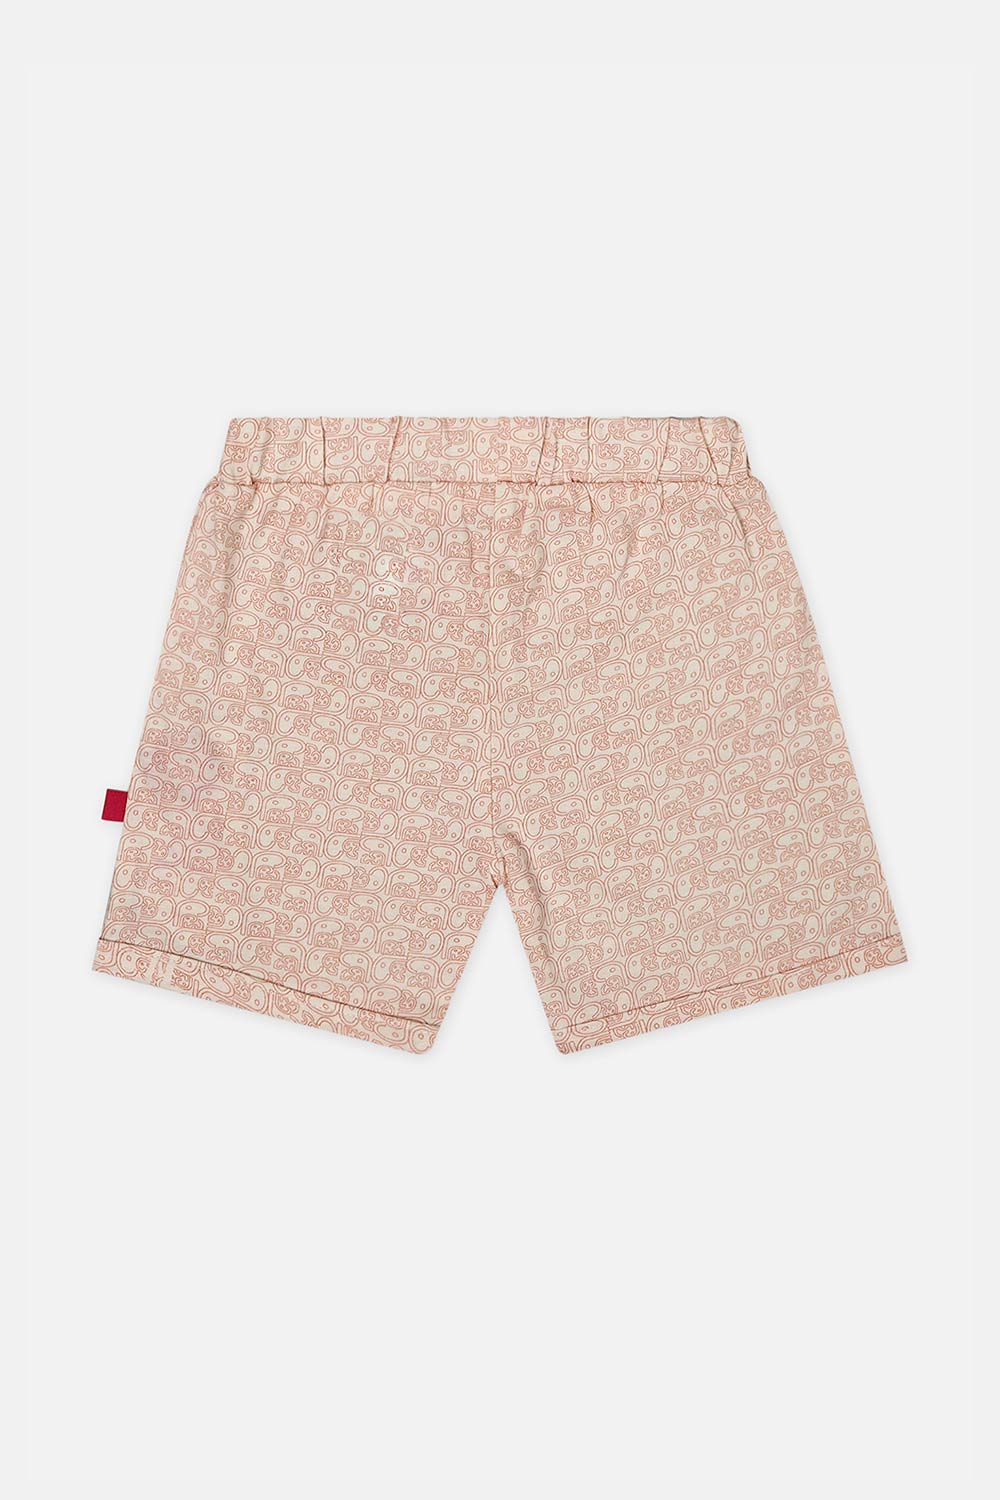 Oh Baby Comfy Shorts Knitted Pink-Sr13